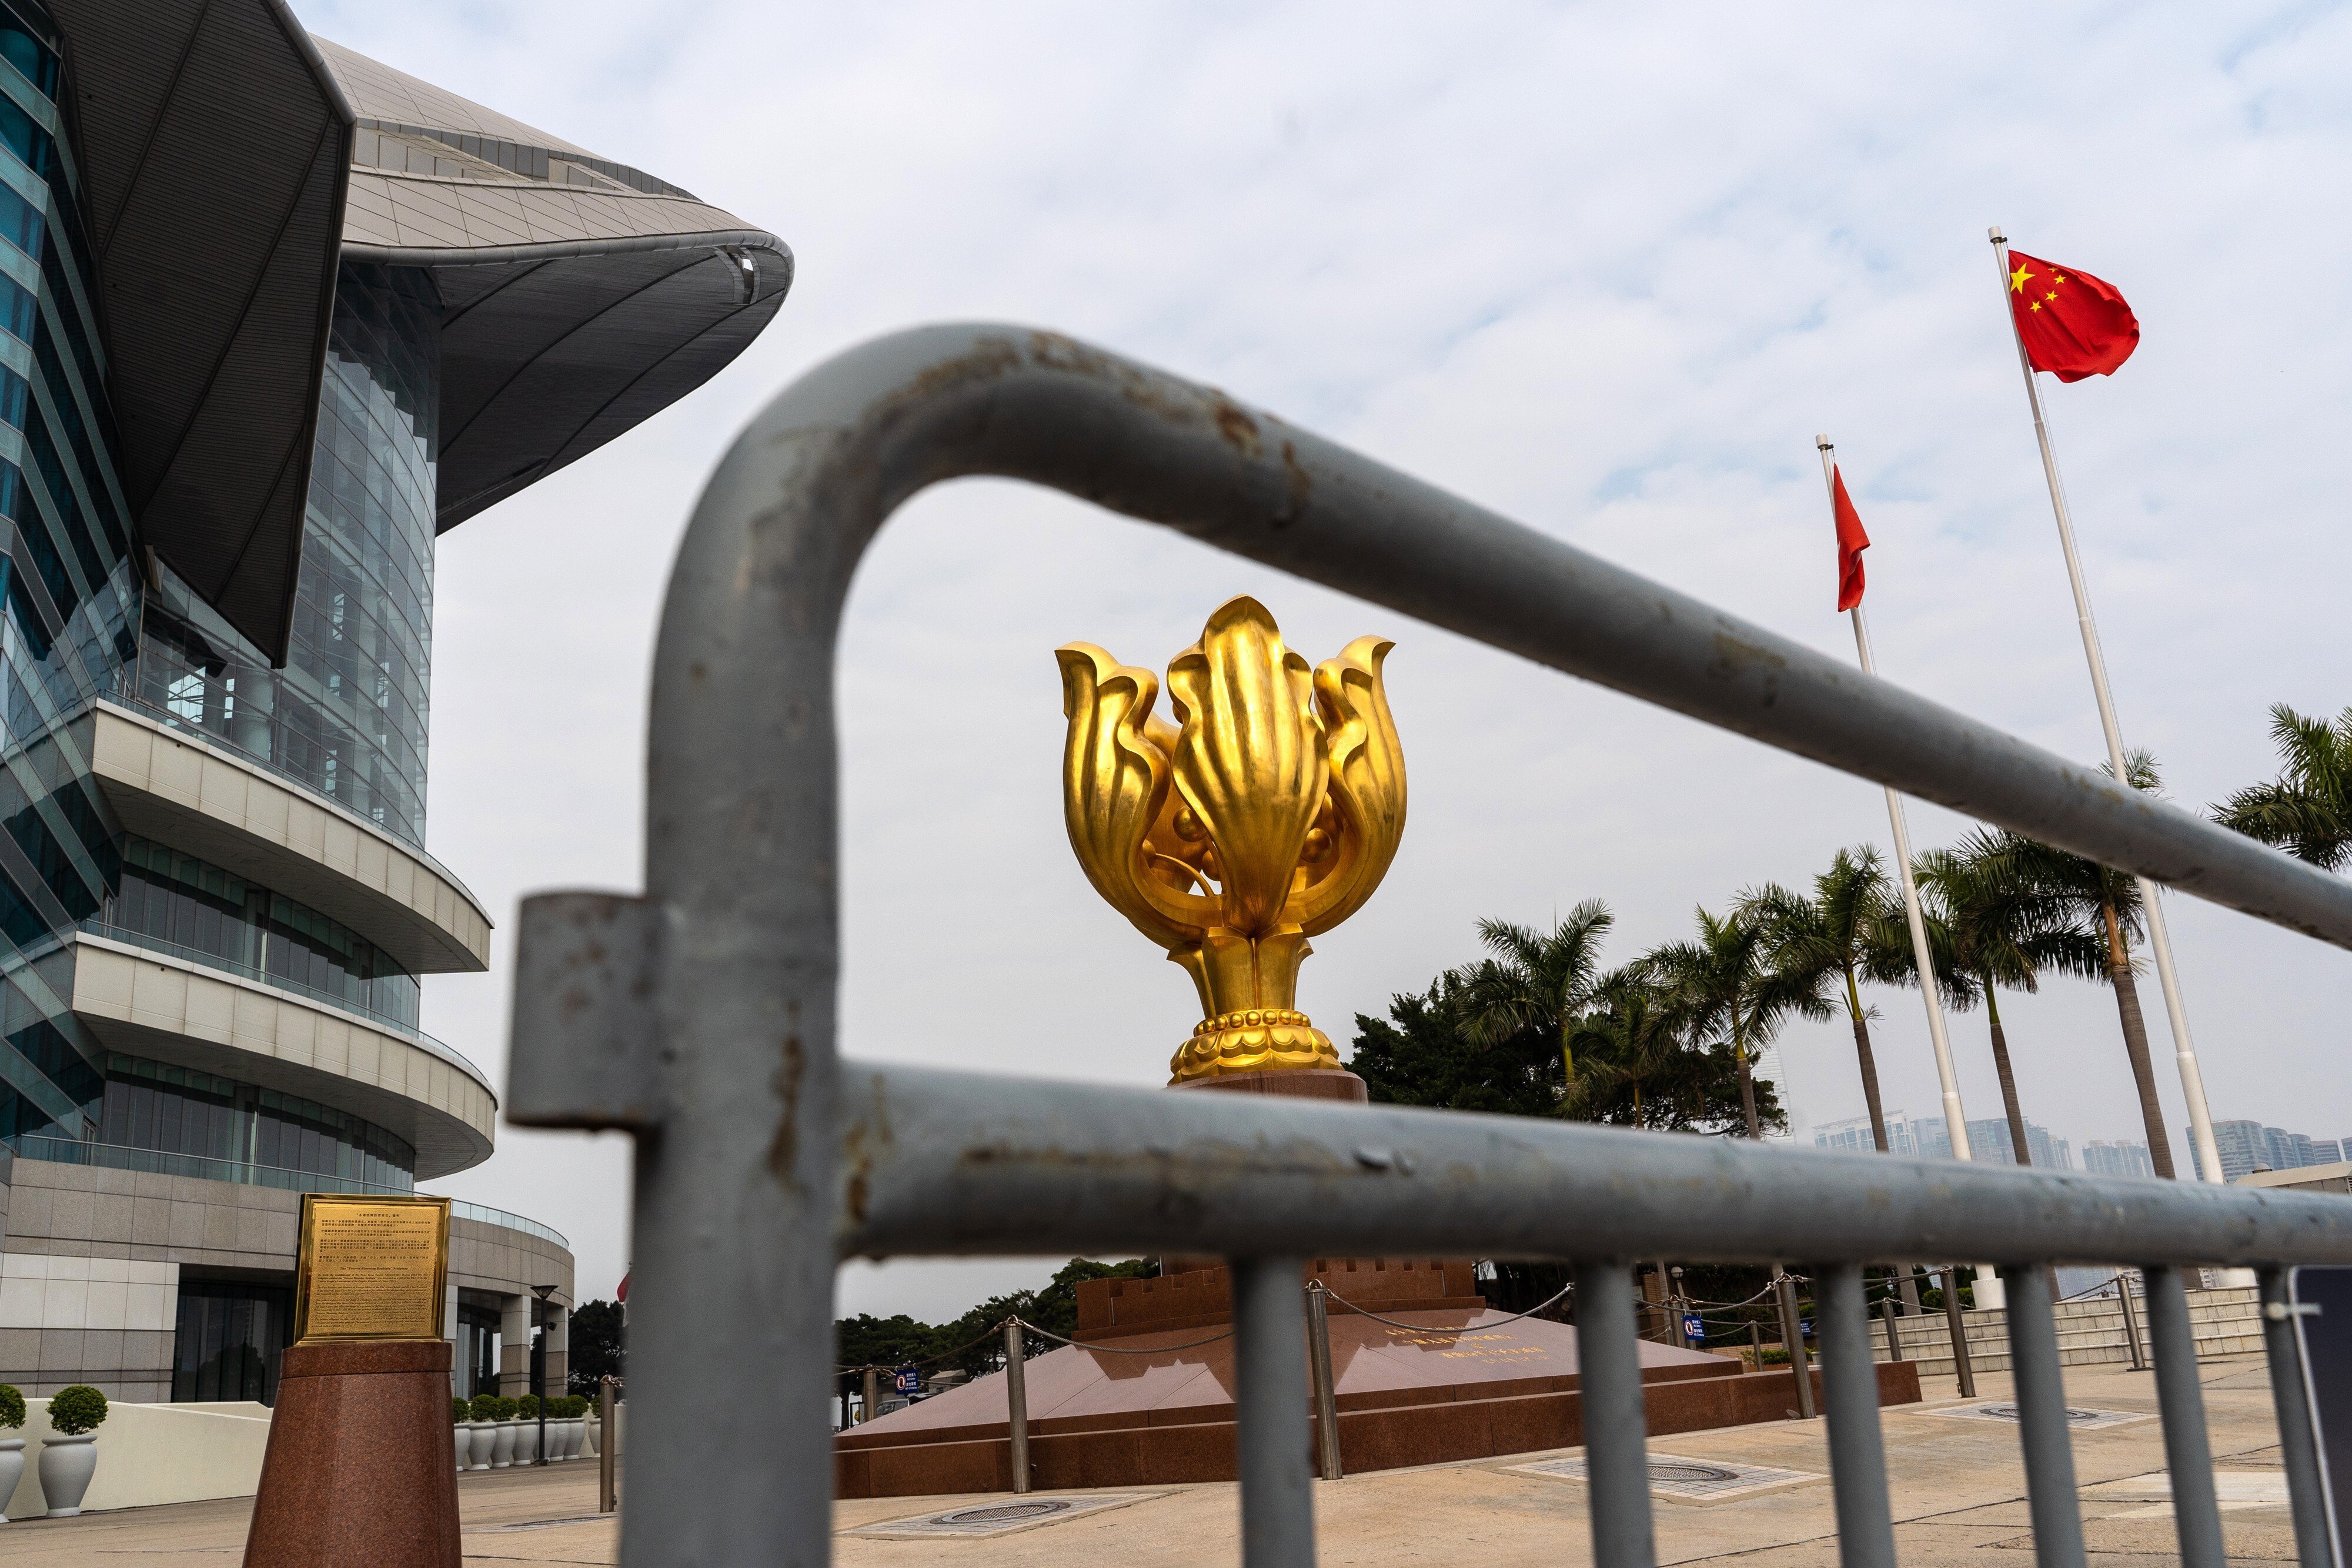 The statue of a golden Bauhinia blakeana, the symbol of Hong Kong, is seen behind a barricade while the city and national flags fly in the distance at the Golden Bauhinia Square in Wan Chai on January 7. Photo: Bloomberg